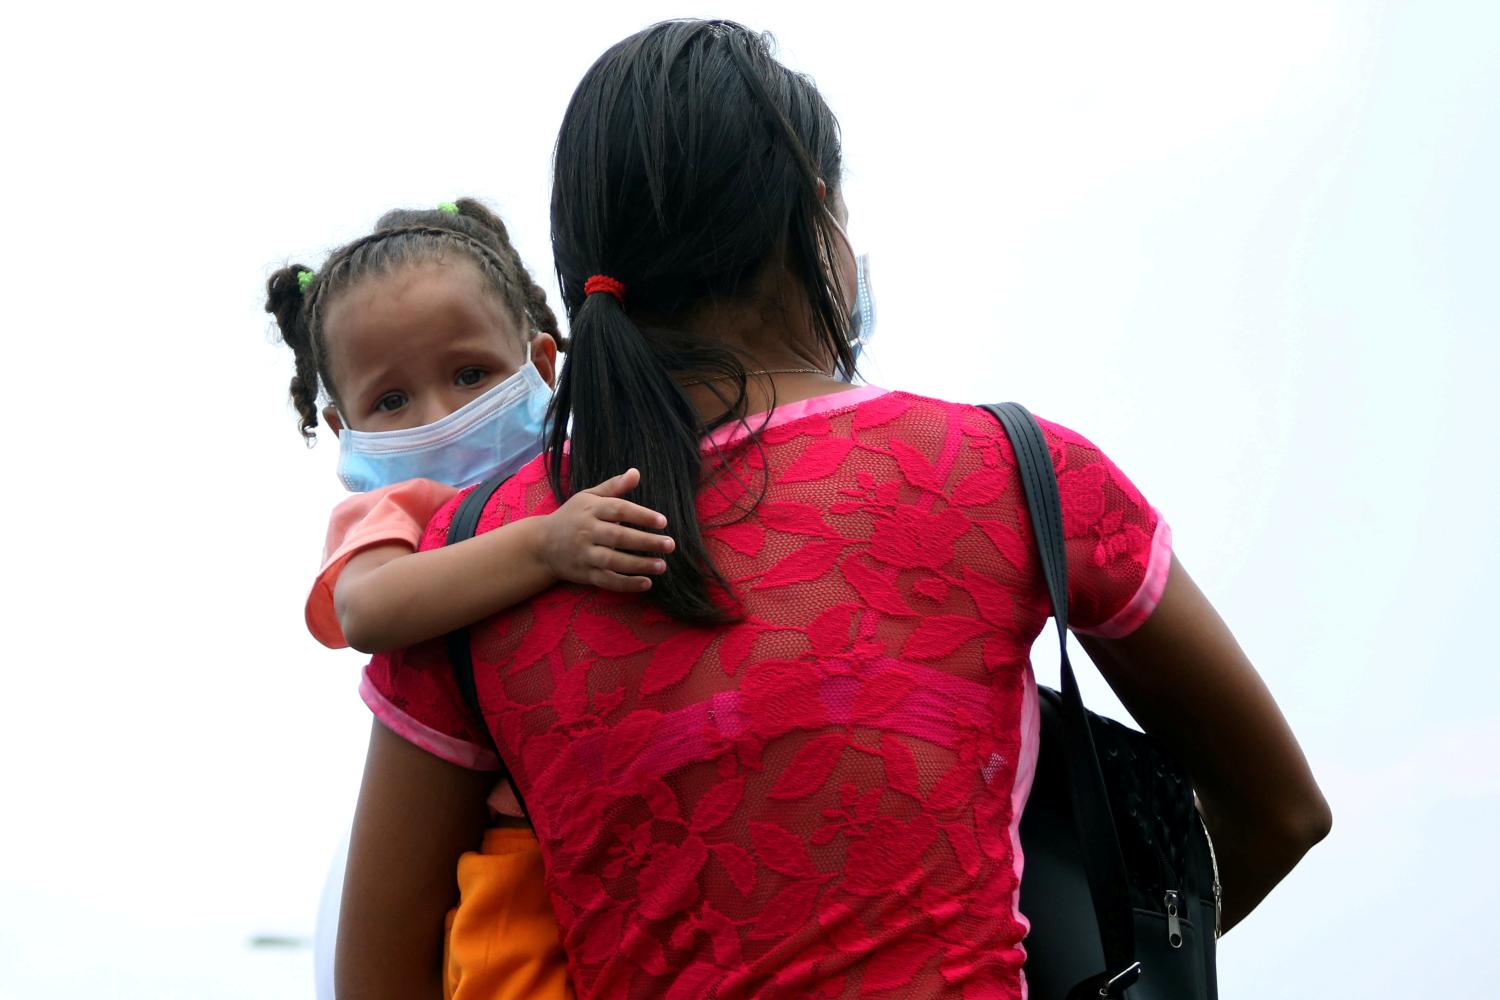 A child wearing protective face mask is carried across the border between Colombia and Venezuela at Simon Bolivar international bridge in Cucuta, Colombia March 12, 2020. REUTERS/Carlos Eduardo Ramirez     TPX IMAGES OF THE DAY